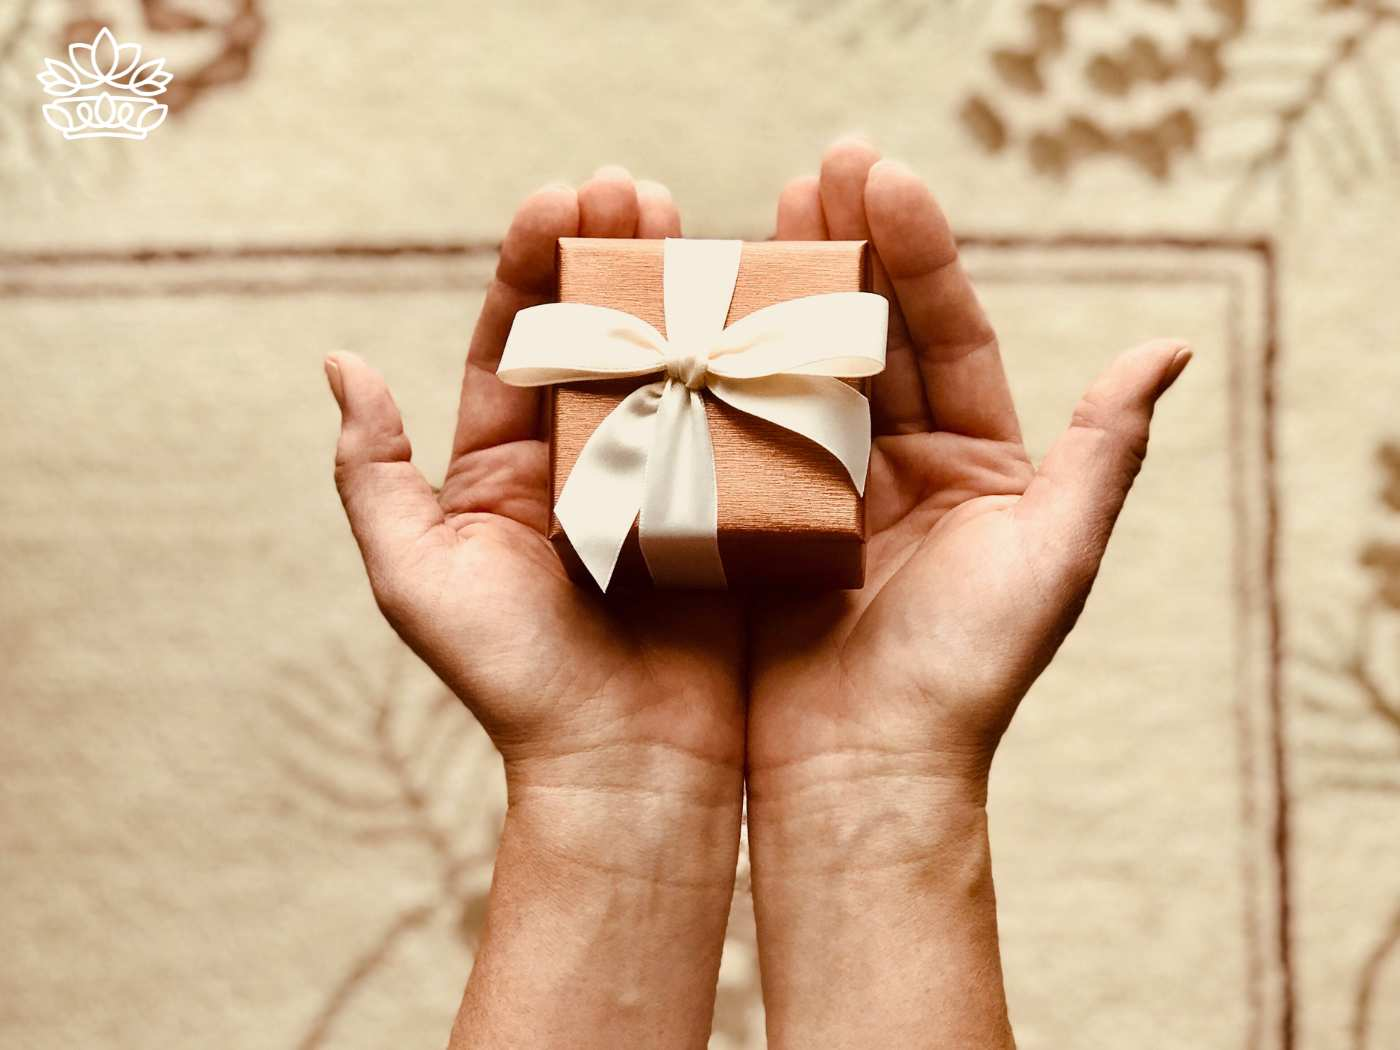 A pair of hands holding a small gift box with a white ribbon, showcasing the perfect gift from the Gift Boxes for Her Collection - South Africa's excellent service in hampers for ladies - Fabulous Flowers and Gifts